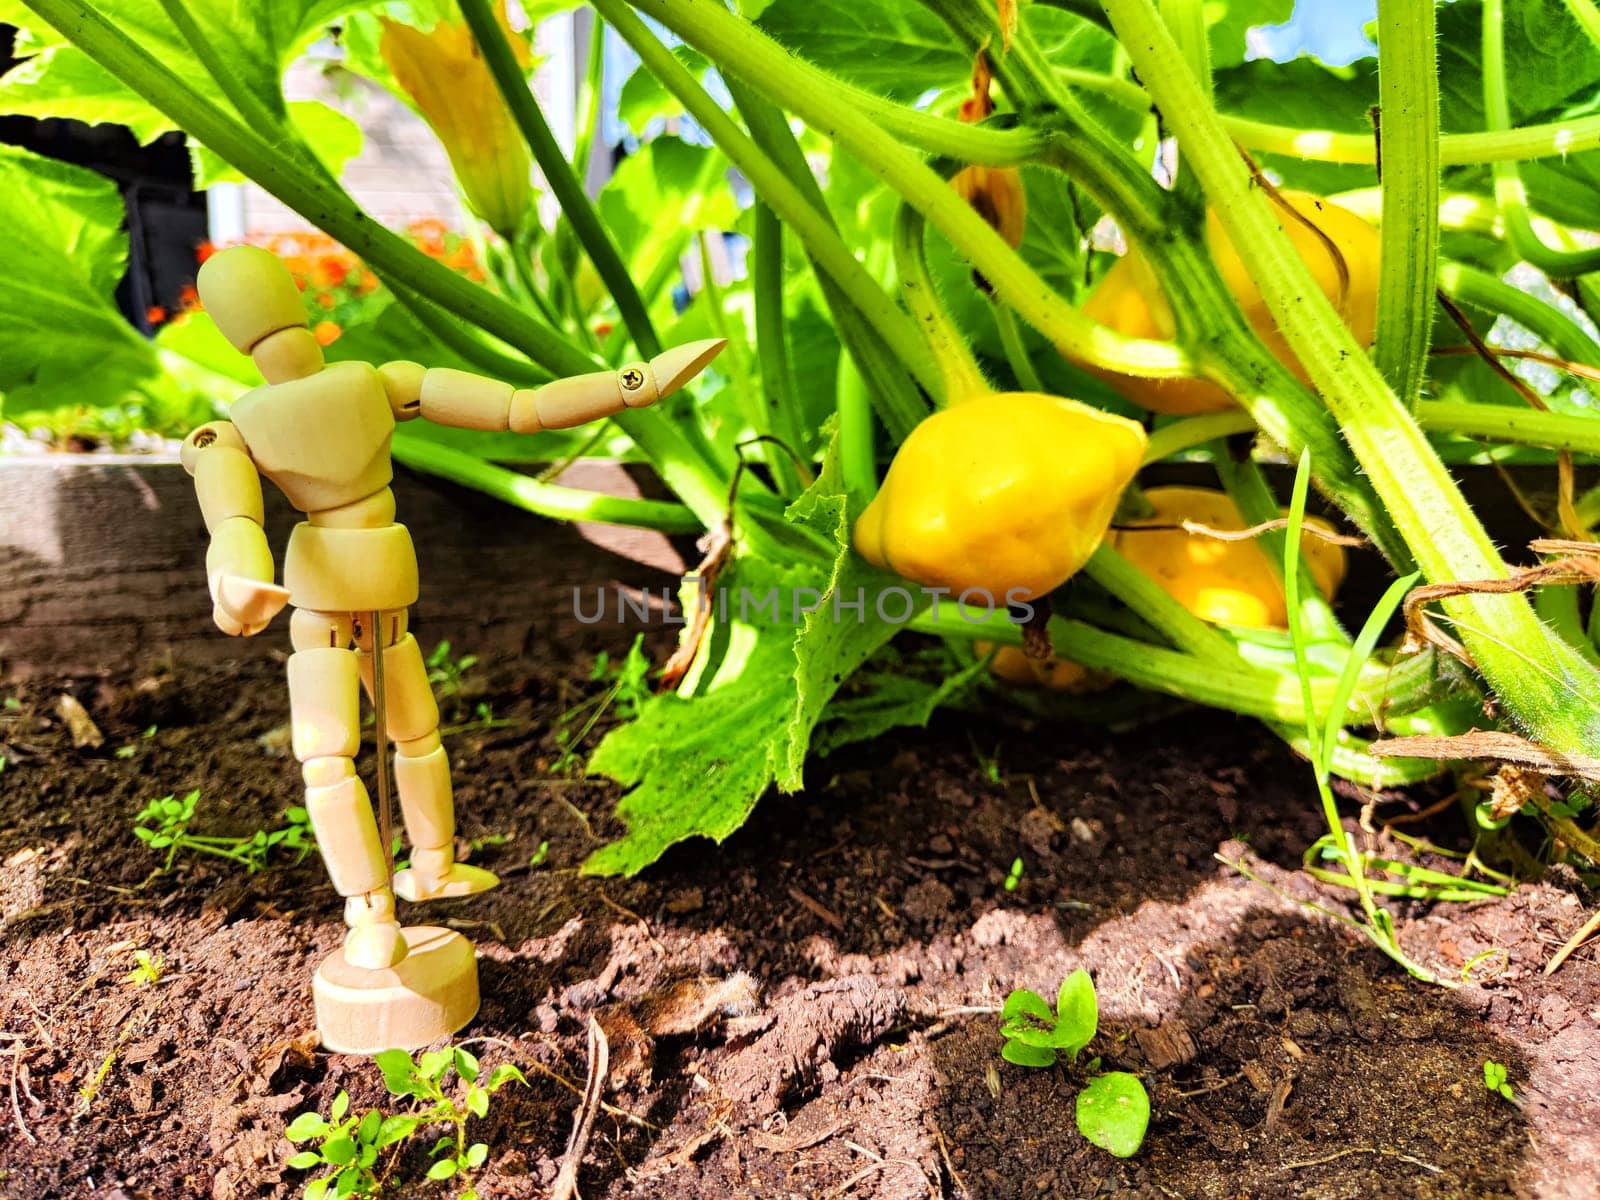 A little man, wooden toy mannequin in a garden with giant vegetables. The gardener has grown and is harvesting. Abstract image with a wooden doll and pumpkin, squash